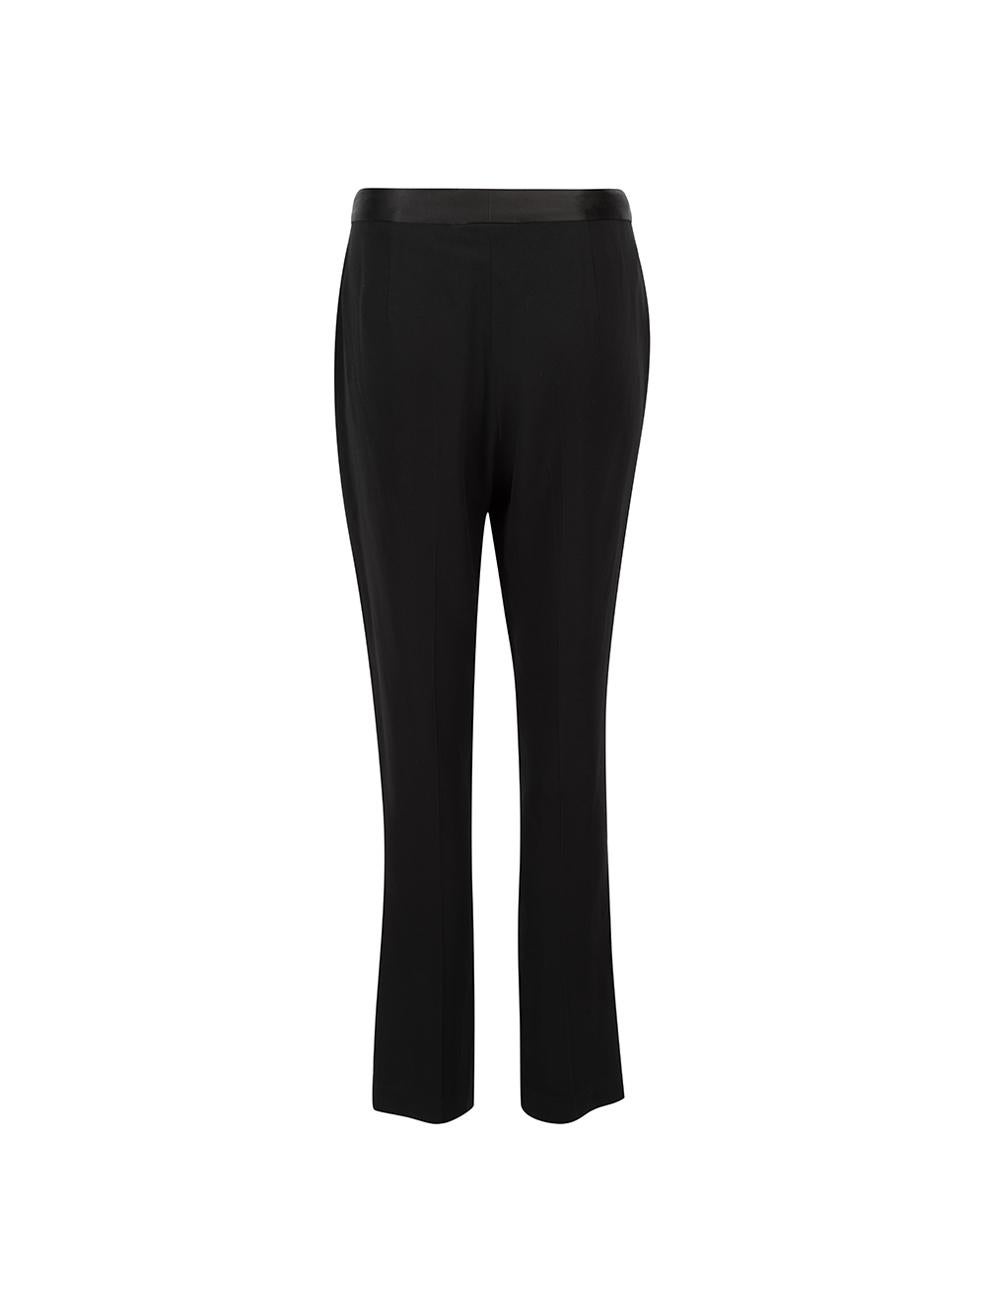 Black Front Zip Detail Trousers Size S In Good Condition For Sale In London, GB